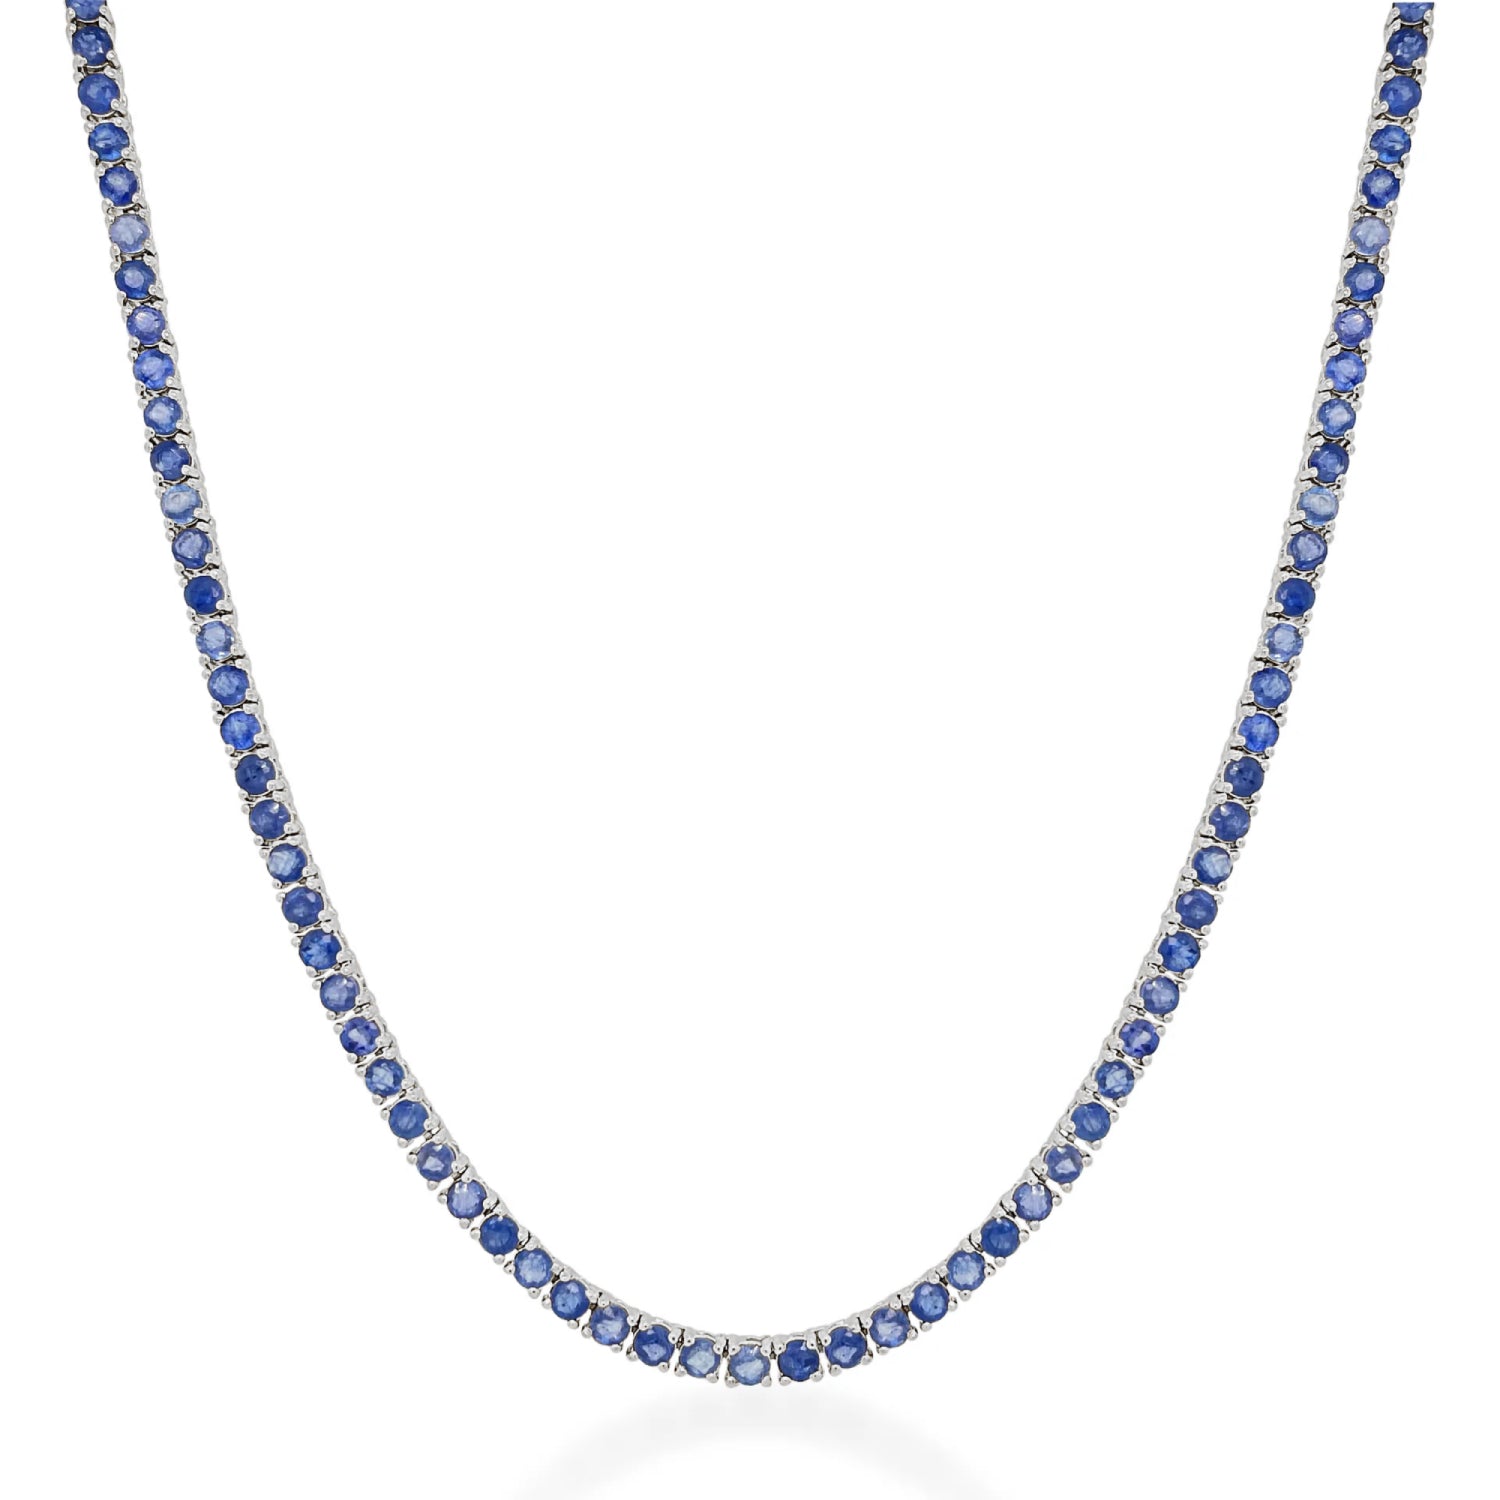 Round Cut Blue Sapphire Tennis Necklace in White Gold